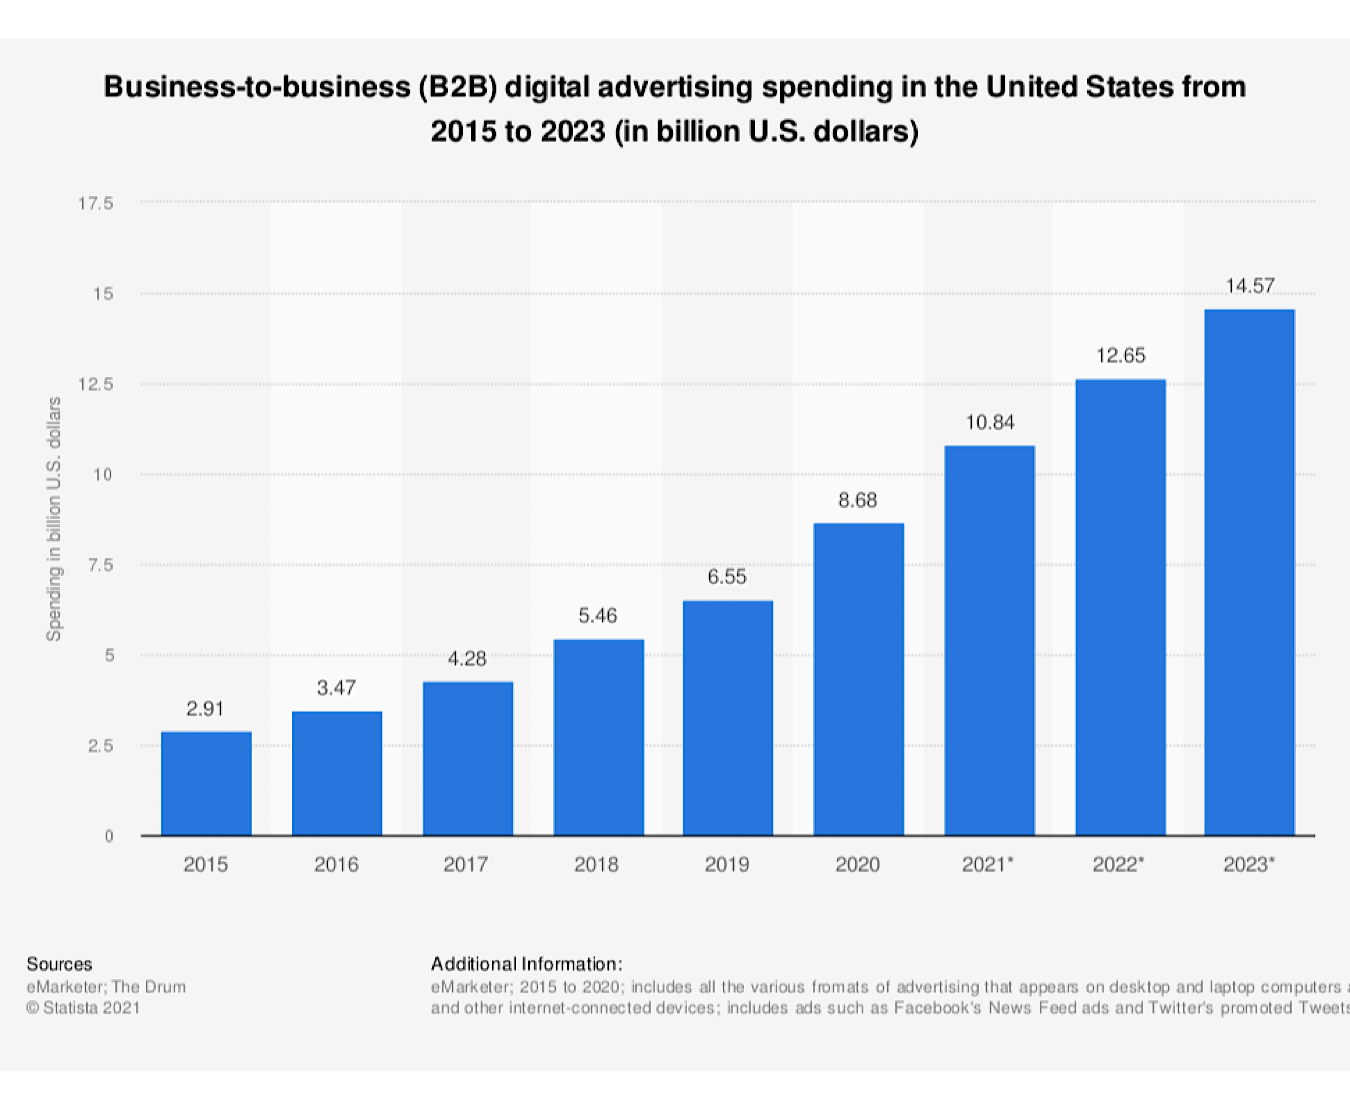 Graph shows steep increase in B2B digital advertising spending in the U.S. from 2015 to 2023